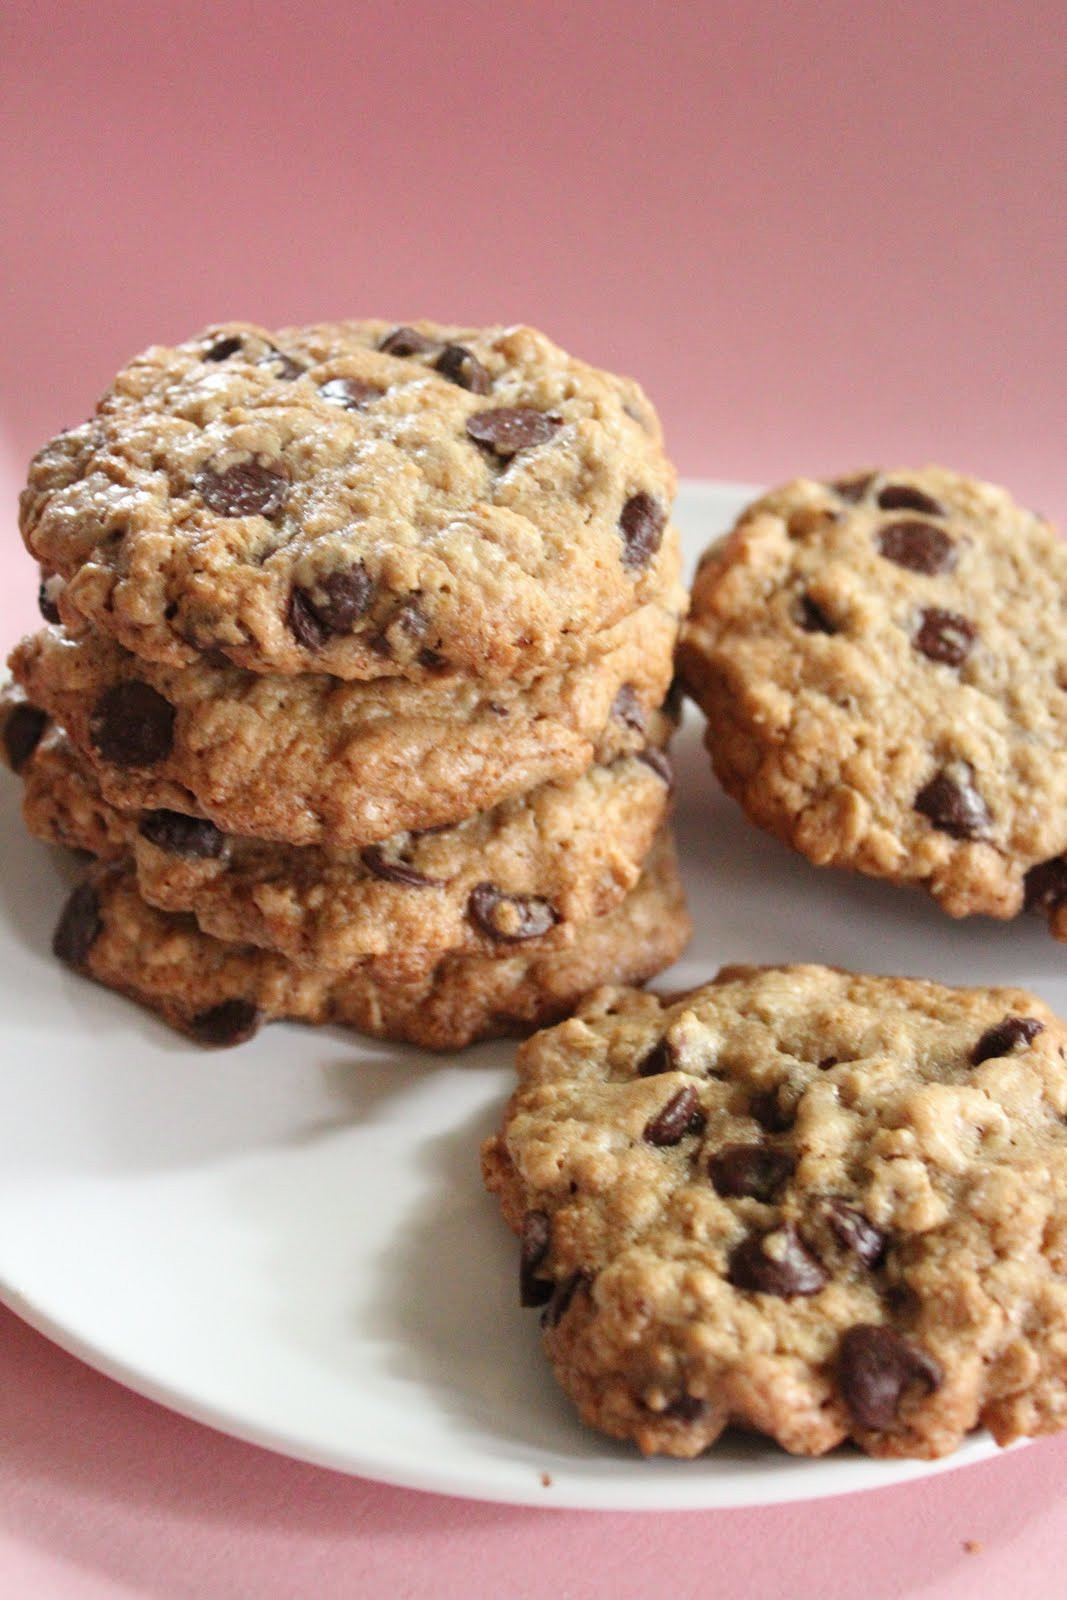 Healthy Oatmeal Chocolate Chip Cookies
 Ultimate healthier oatmeal and chocolate chip cookies